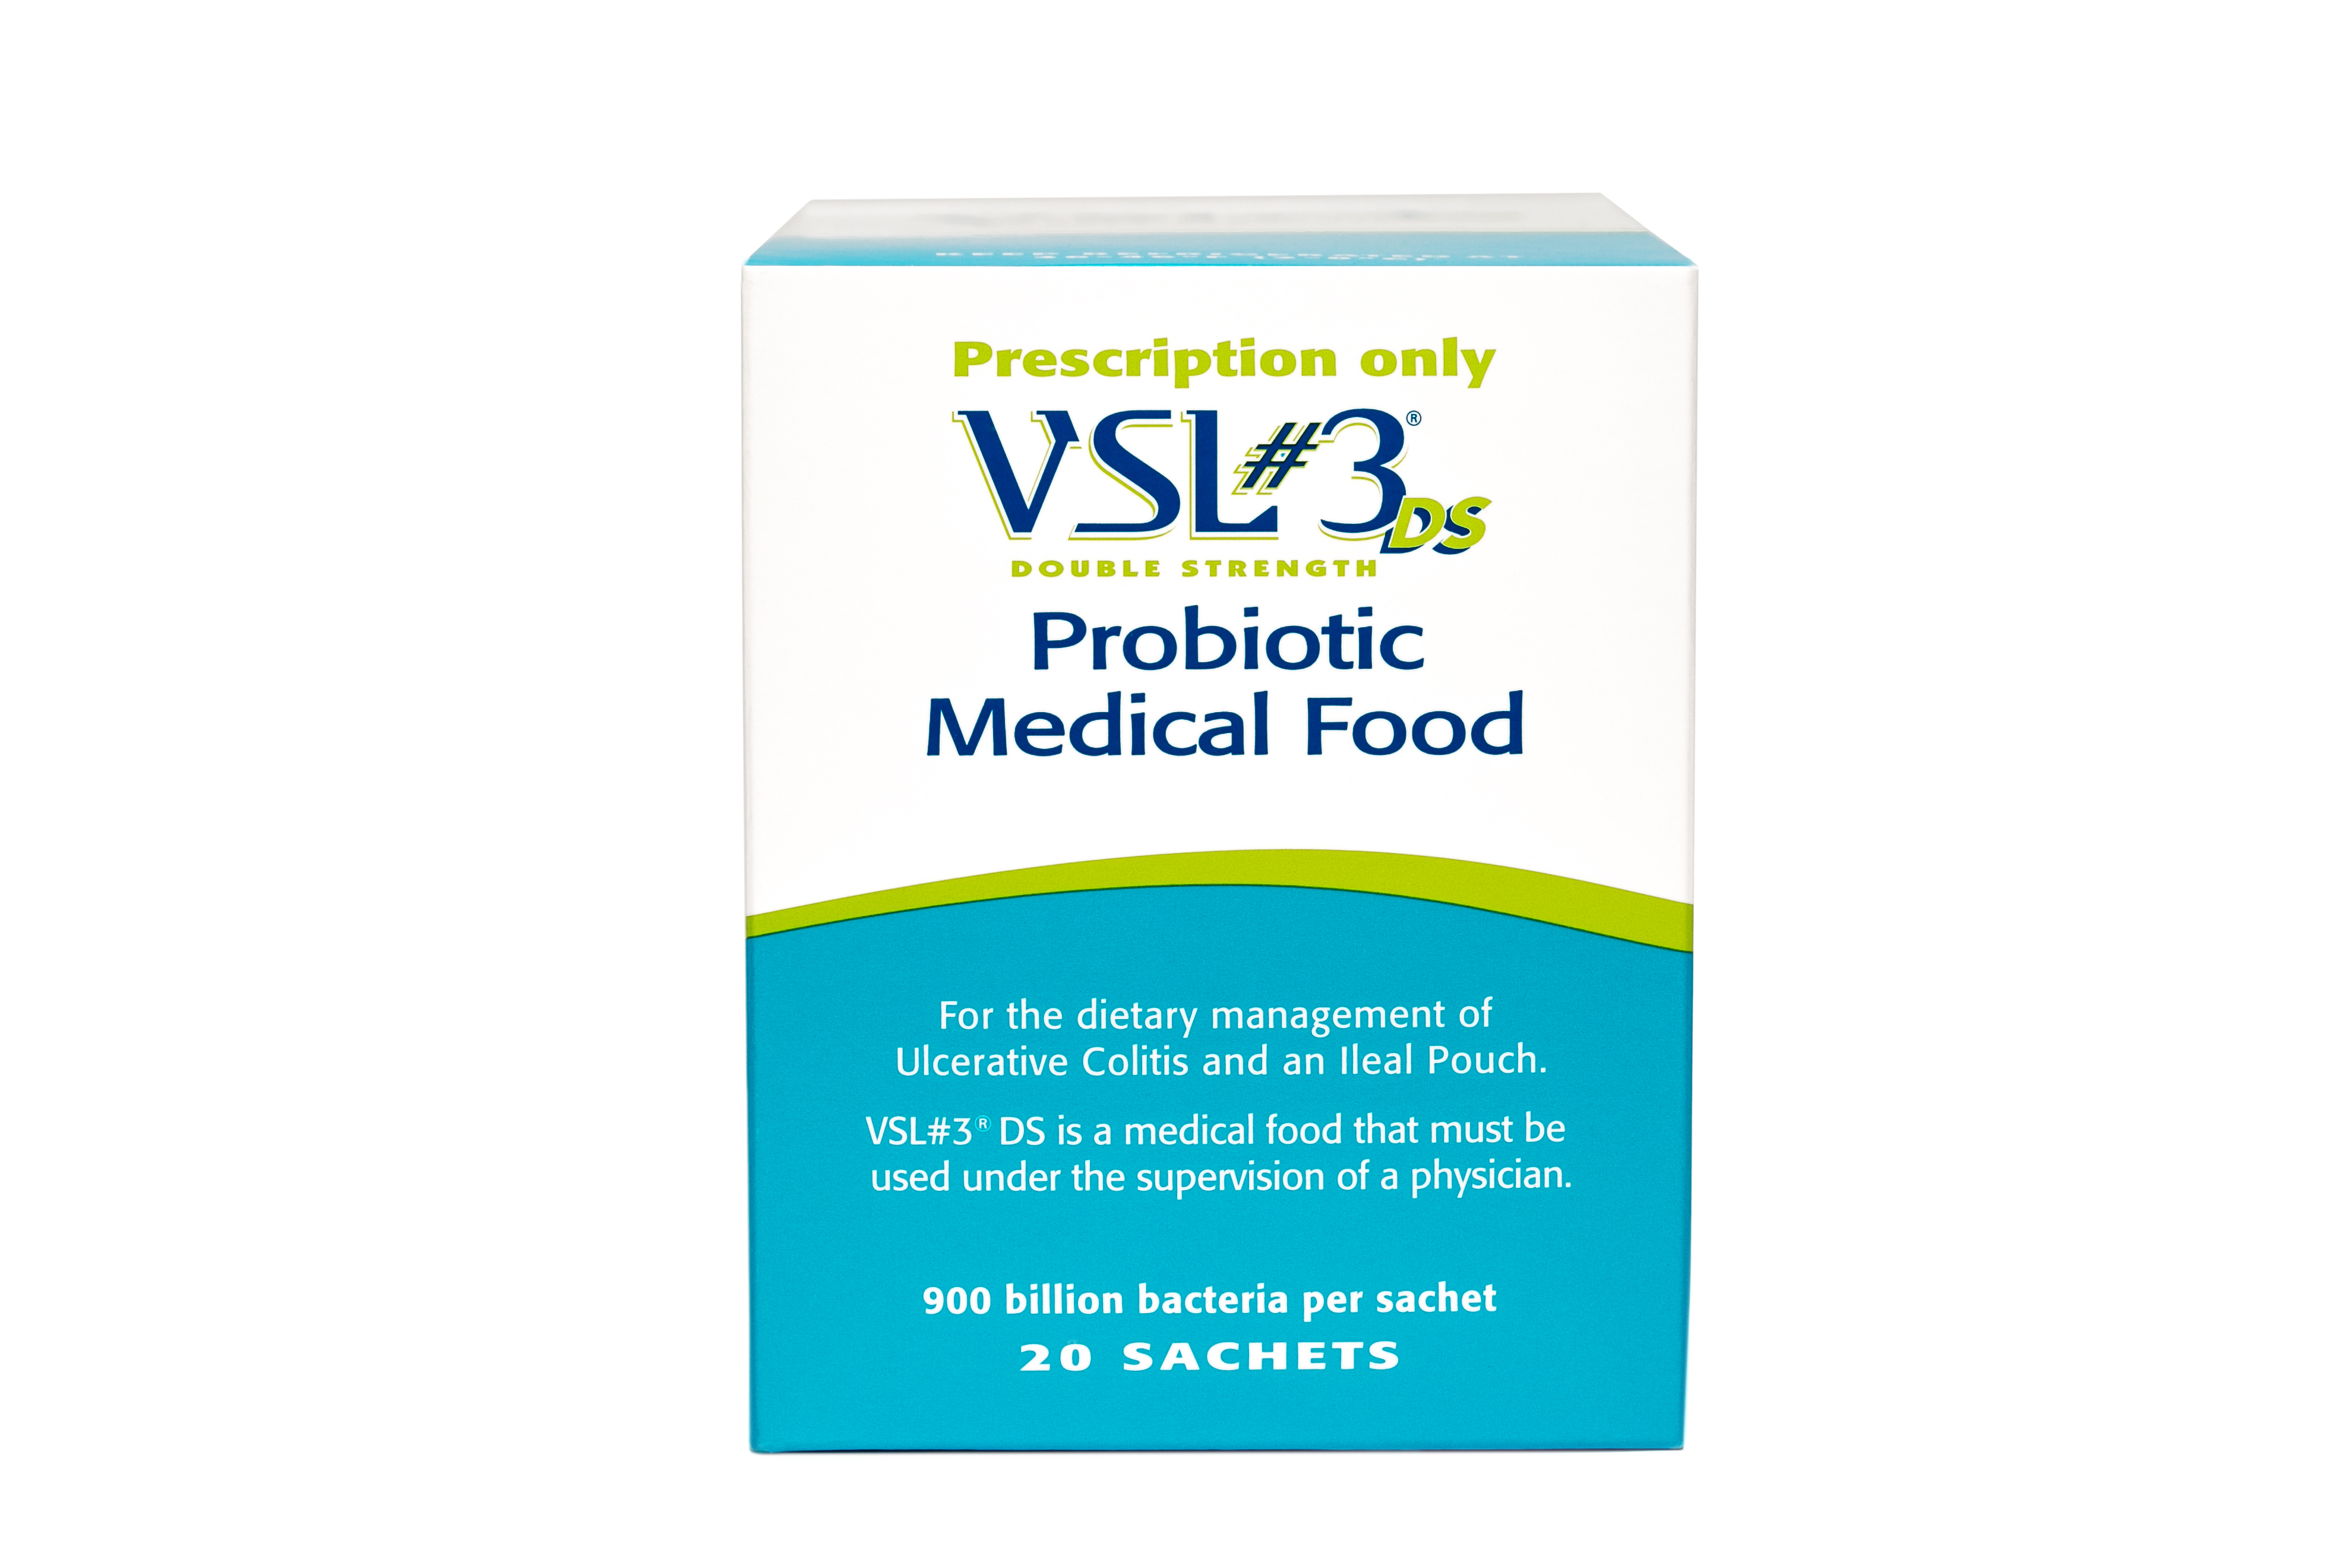 VSL#3 High Potency Medical Food Probiotic to Manage IBS, UC and ileal Pouch by Sigma-Tau Pharmaceuticals